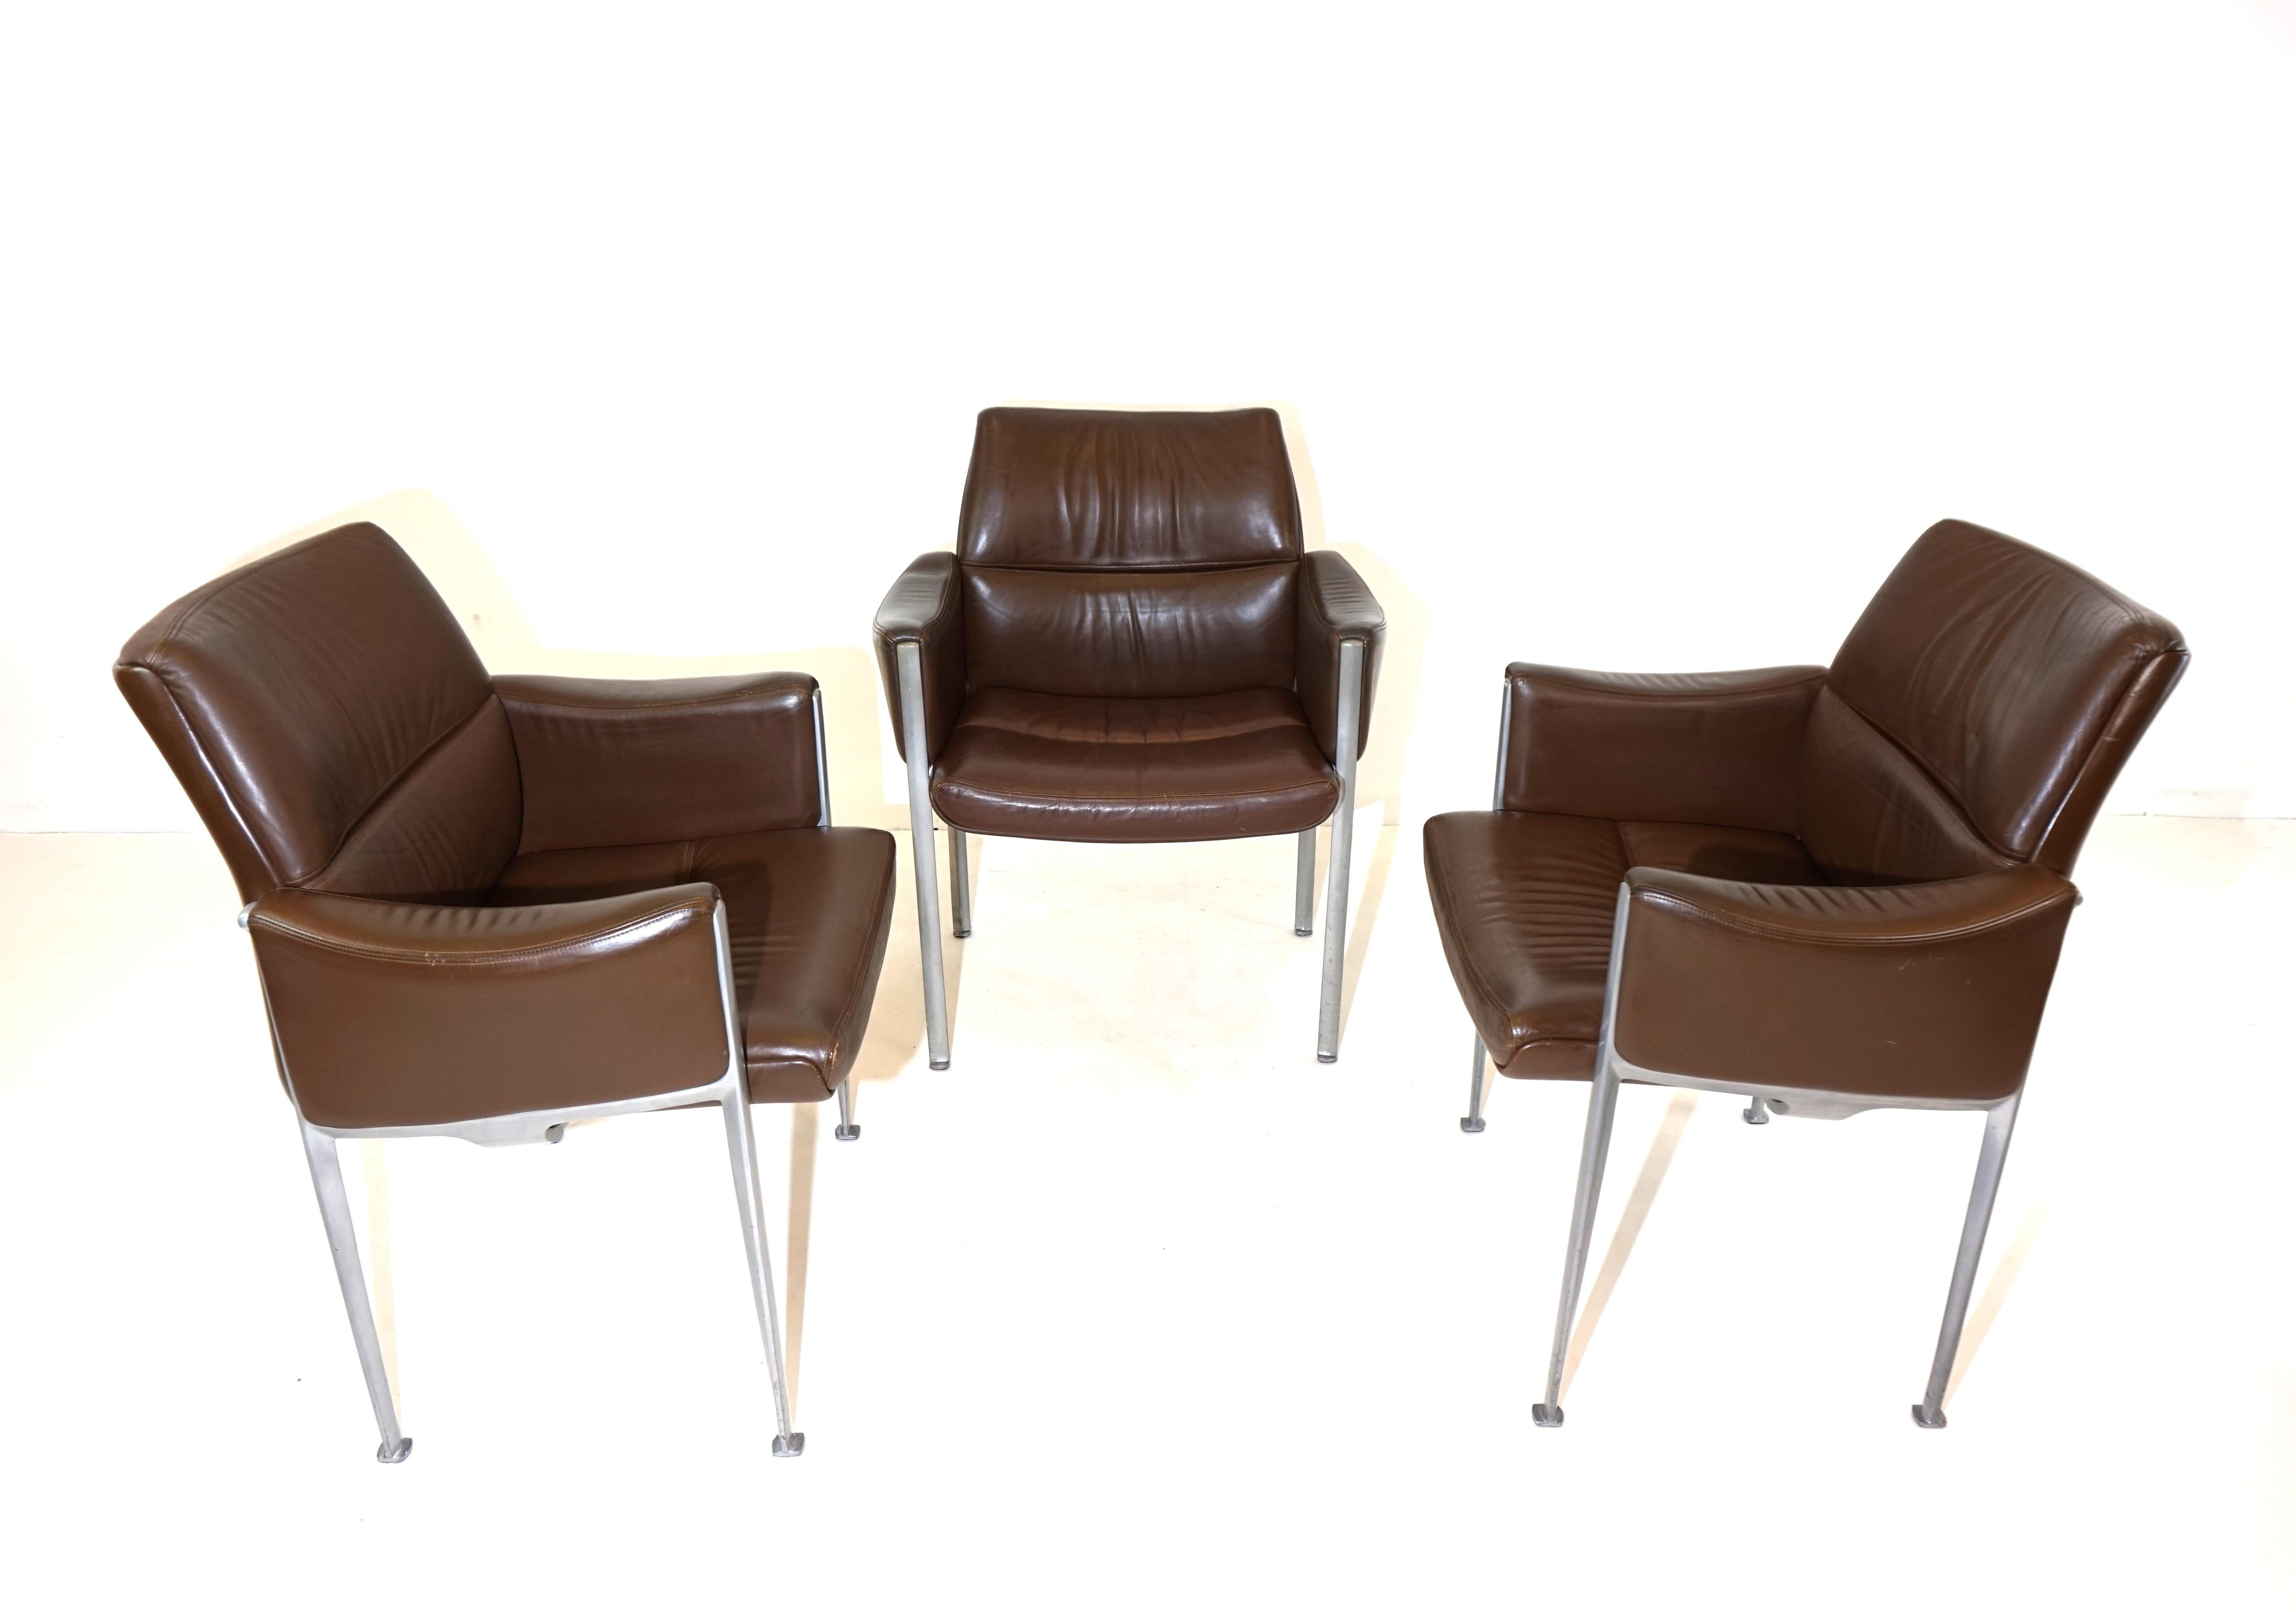 Leather Röder Söhne Set of 3 leather office/dining room chairs by Miller Borgsen